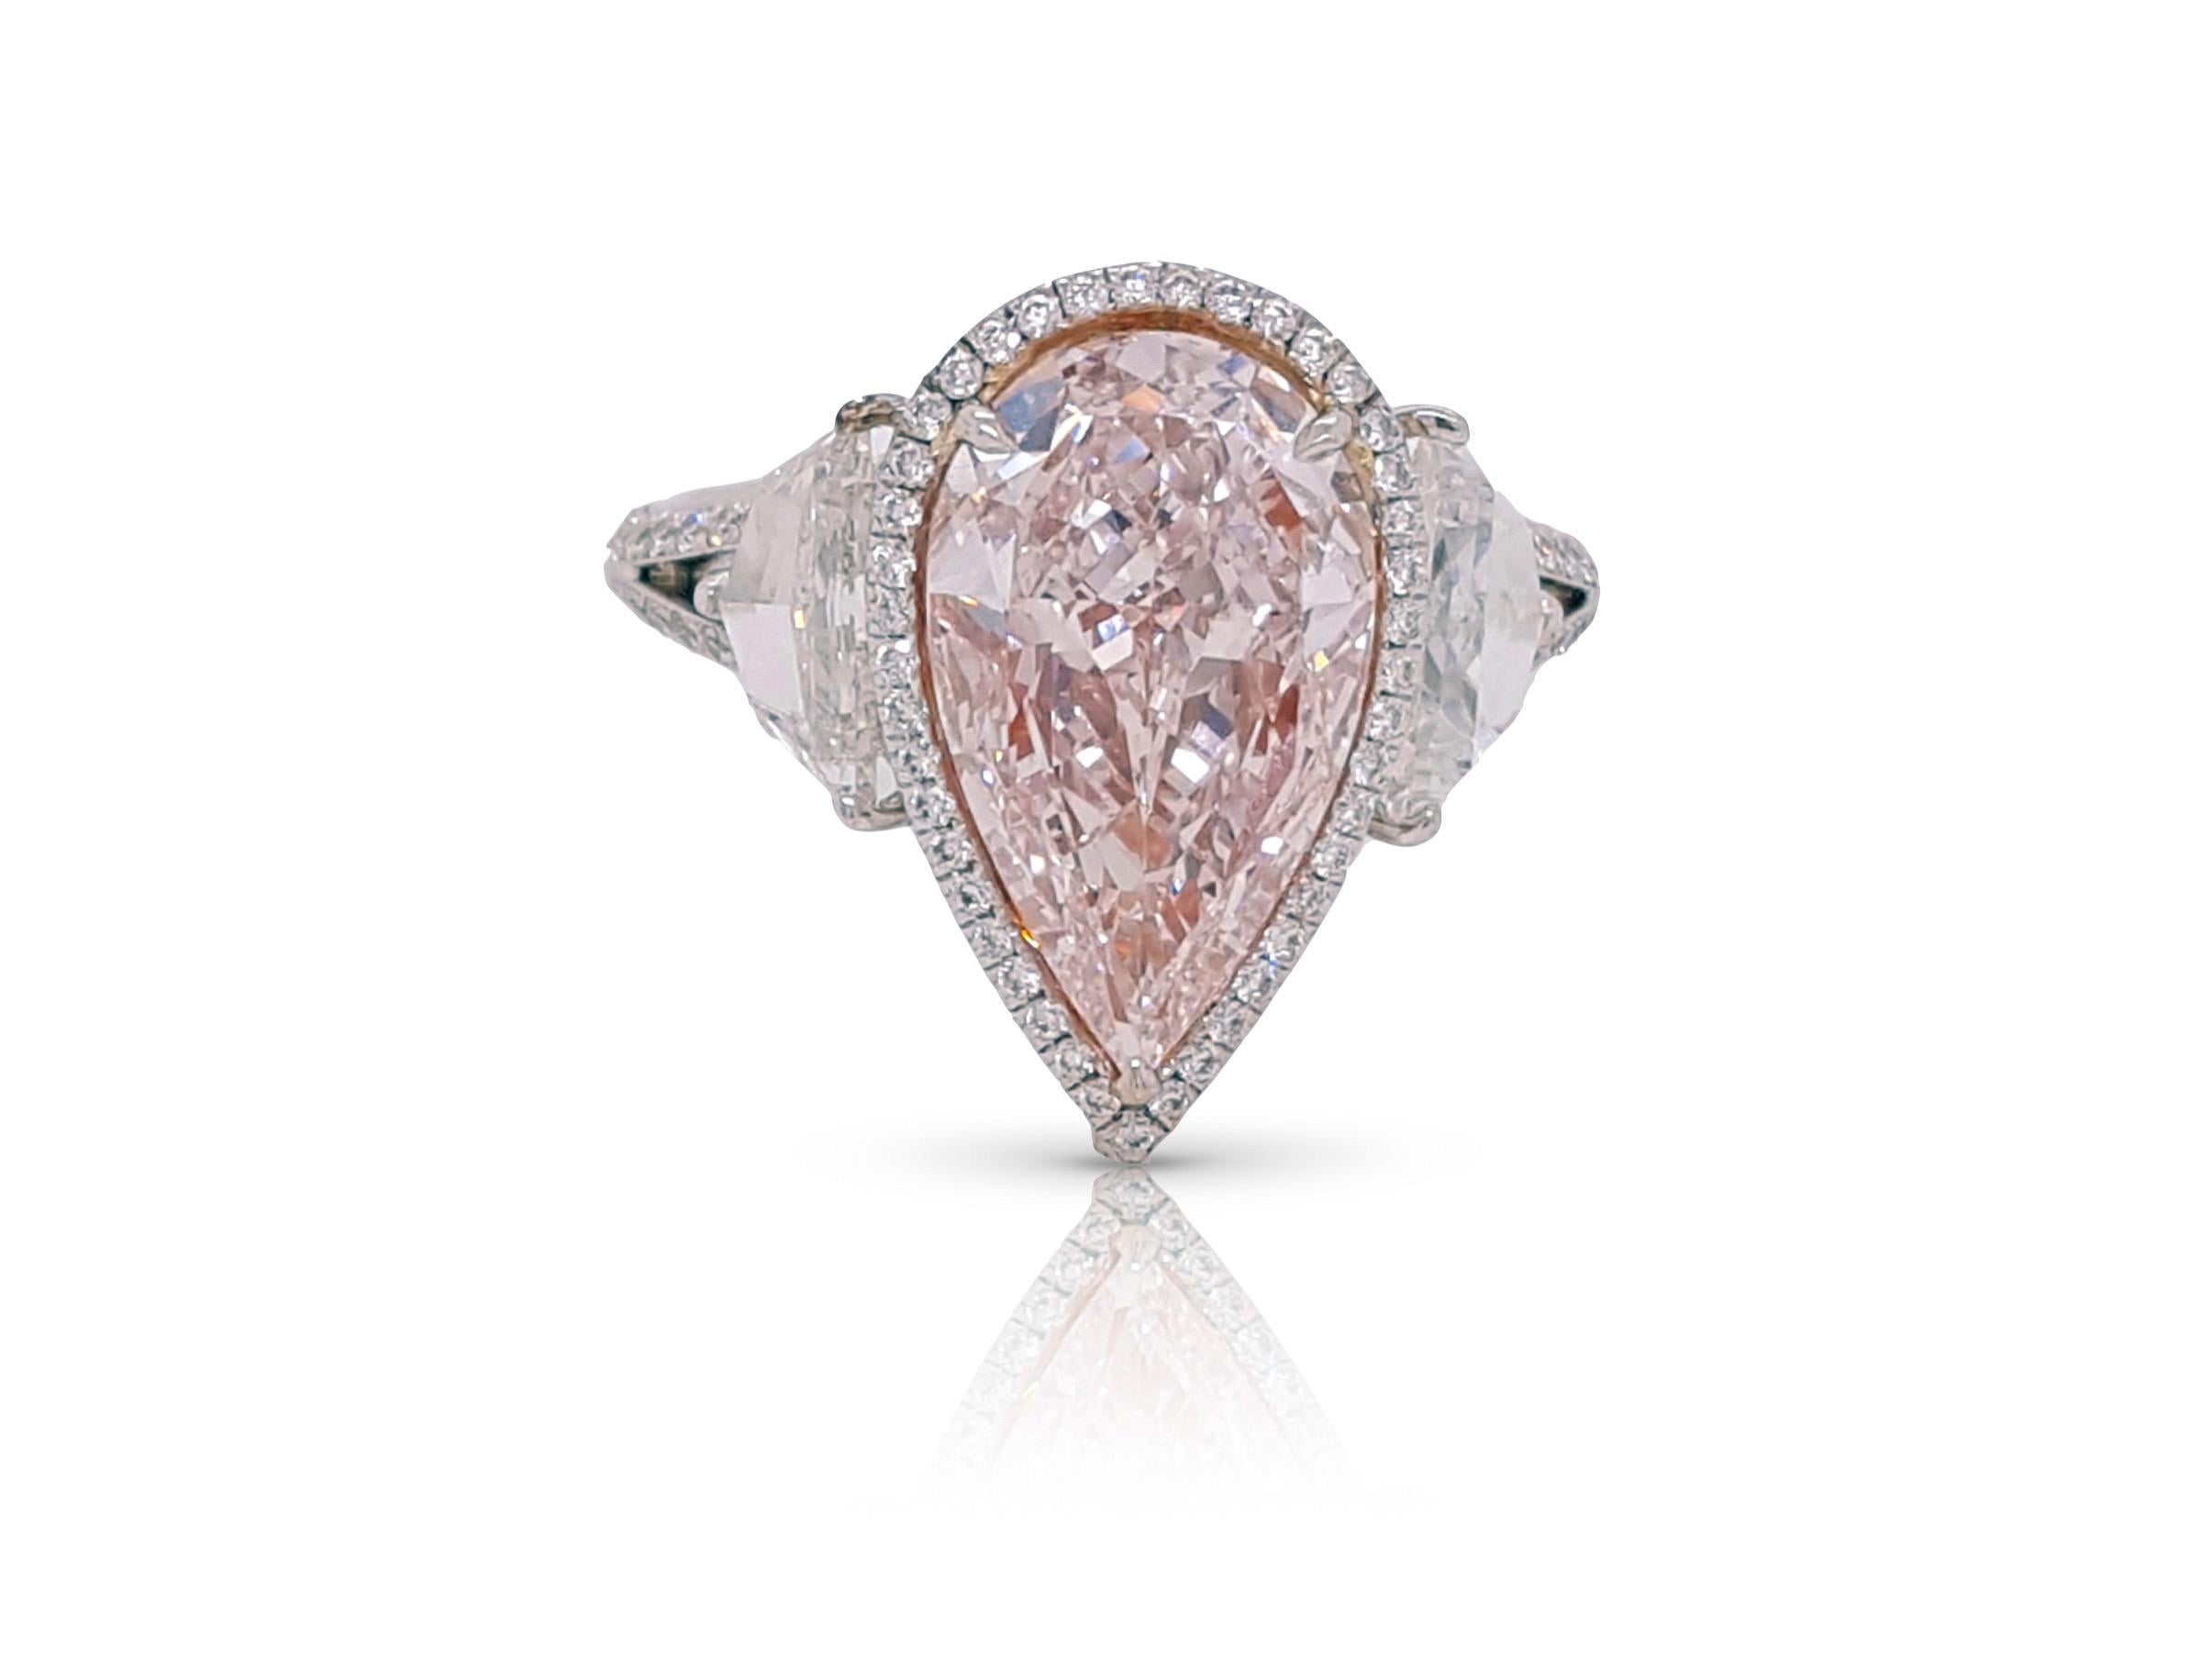 Absolutely stunning engagement ring style showcasing a Fancy Light Pink 3.25 carat pear-shaped diamond certified by GIA as VS2 clarity. The center stone surrounded by a round brilliant white diamonds halo, Flanked by two Cadillac cut diamonds total